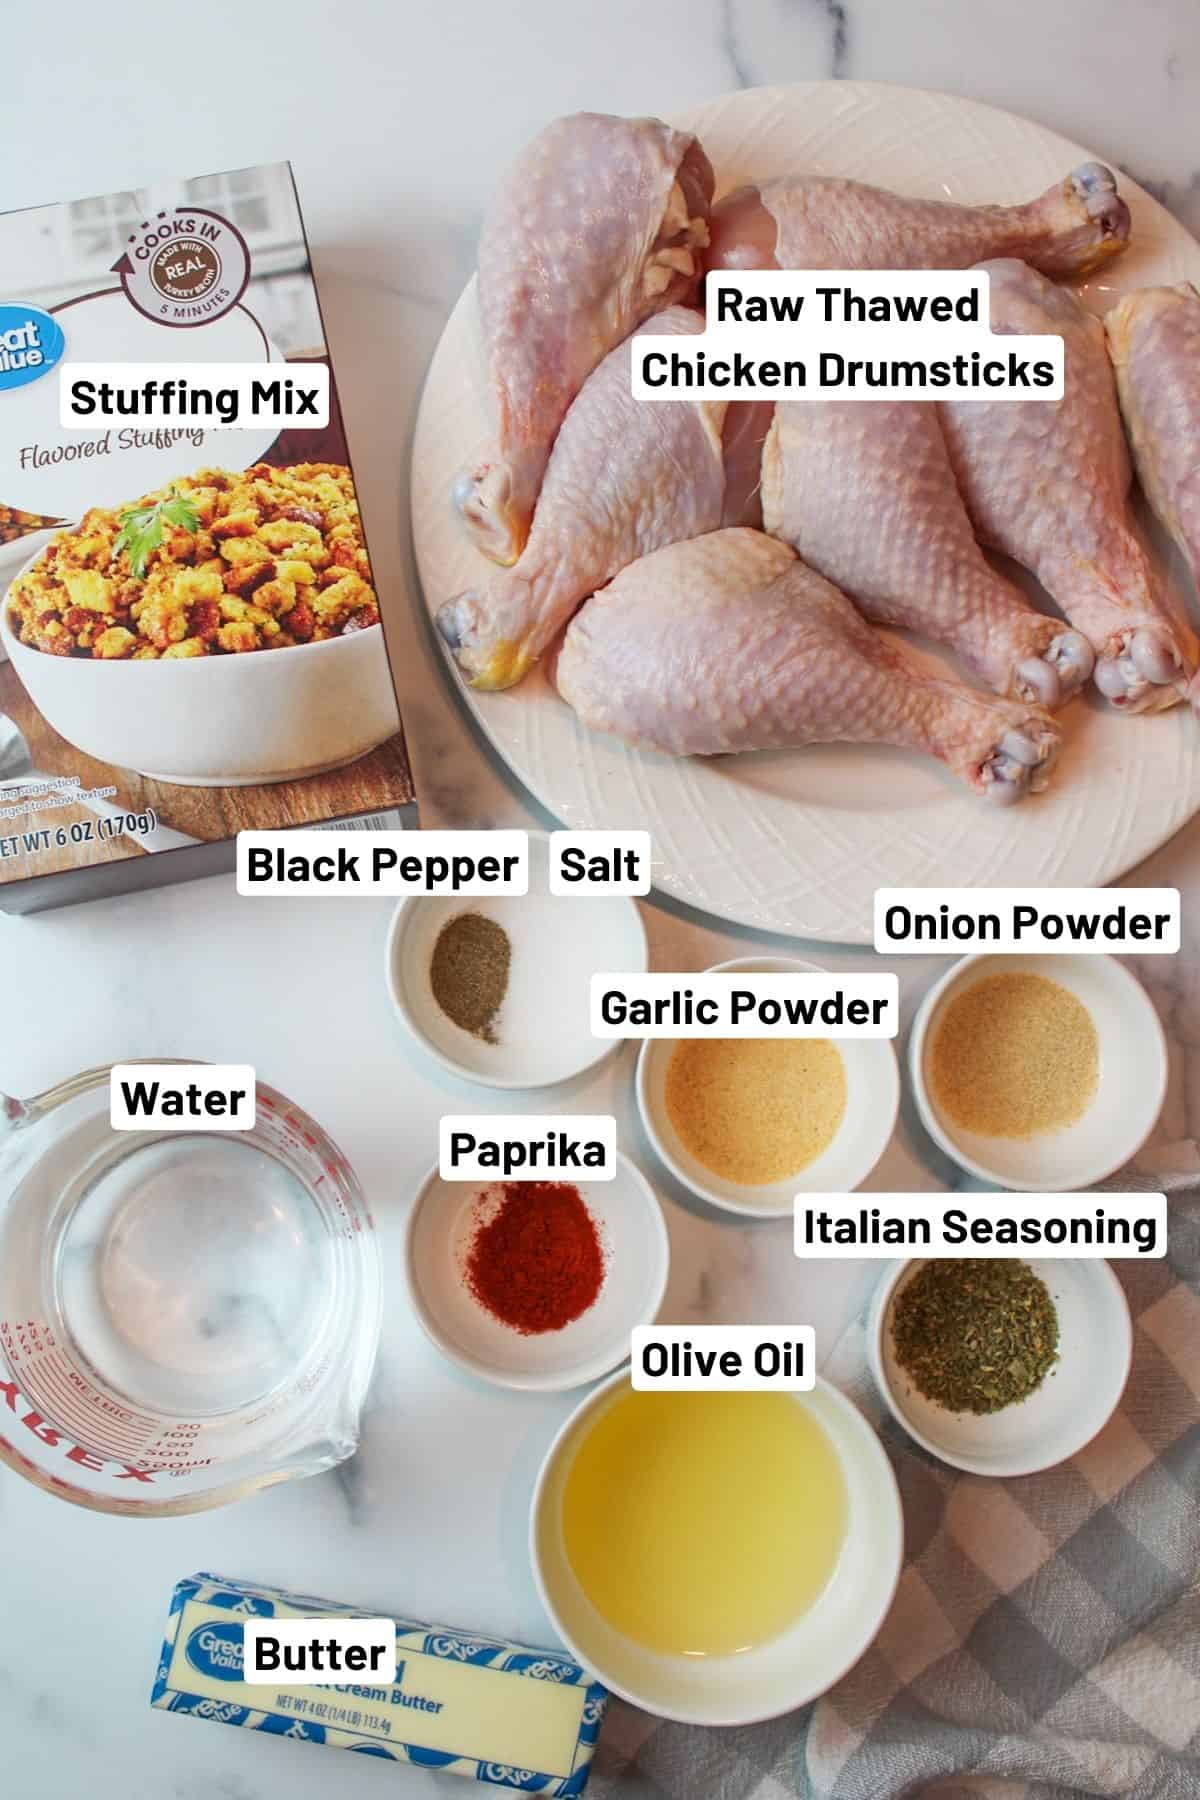 labeled ingredients needed to make stuffed chicken legs.